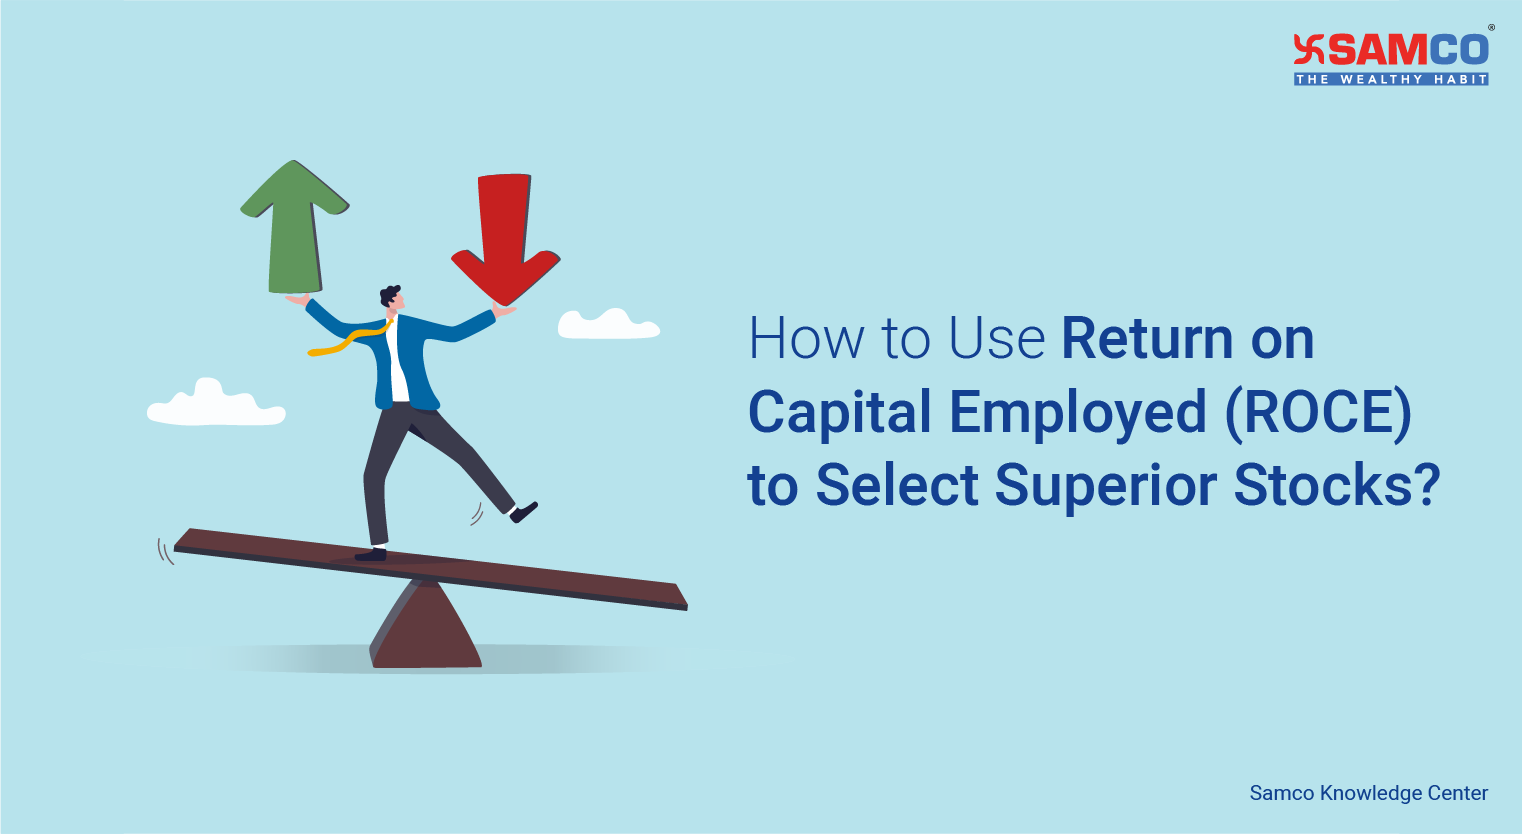 How to Use Return on Capital Employed (ROCE) to Select Superior Stocks?